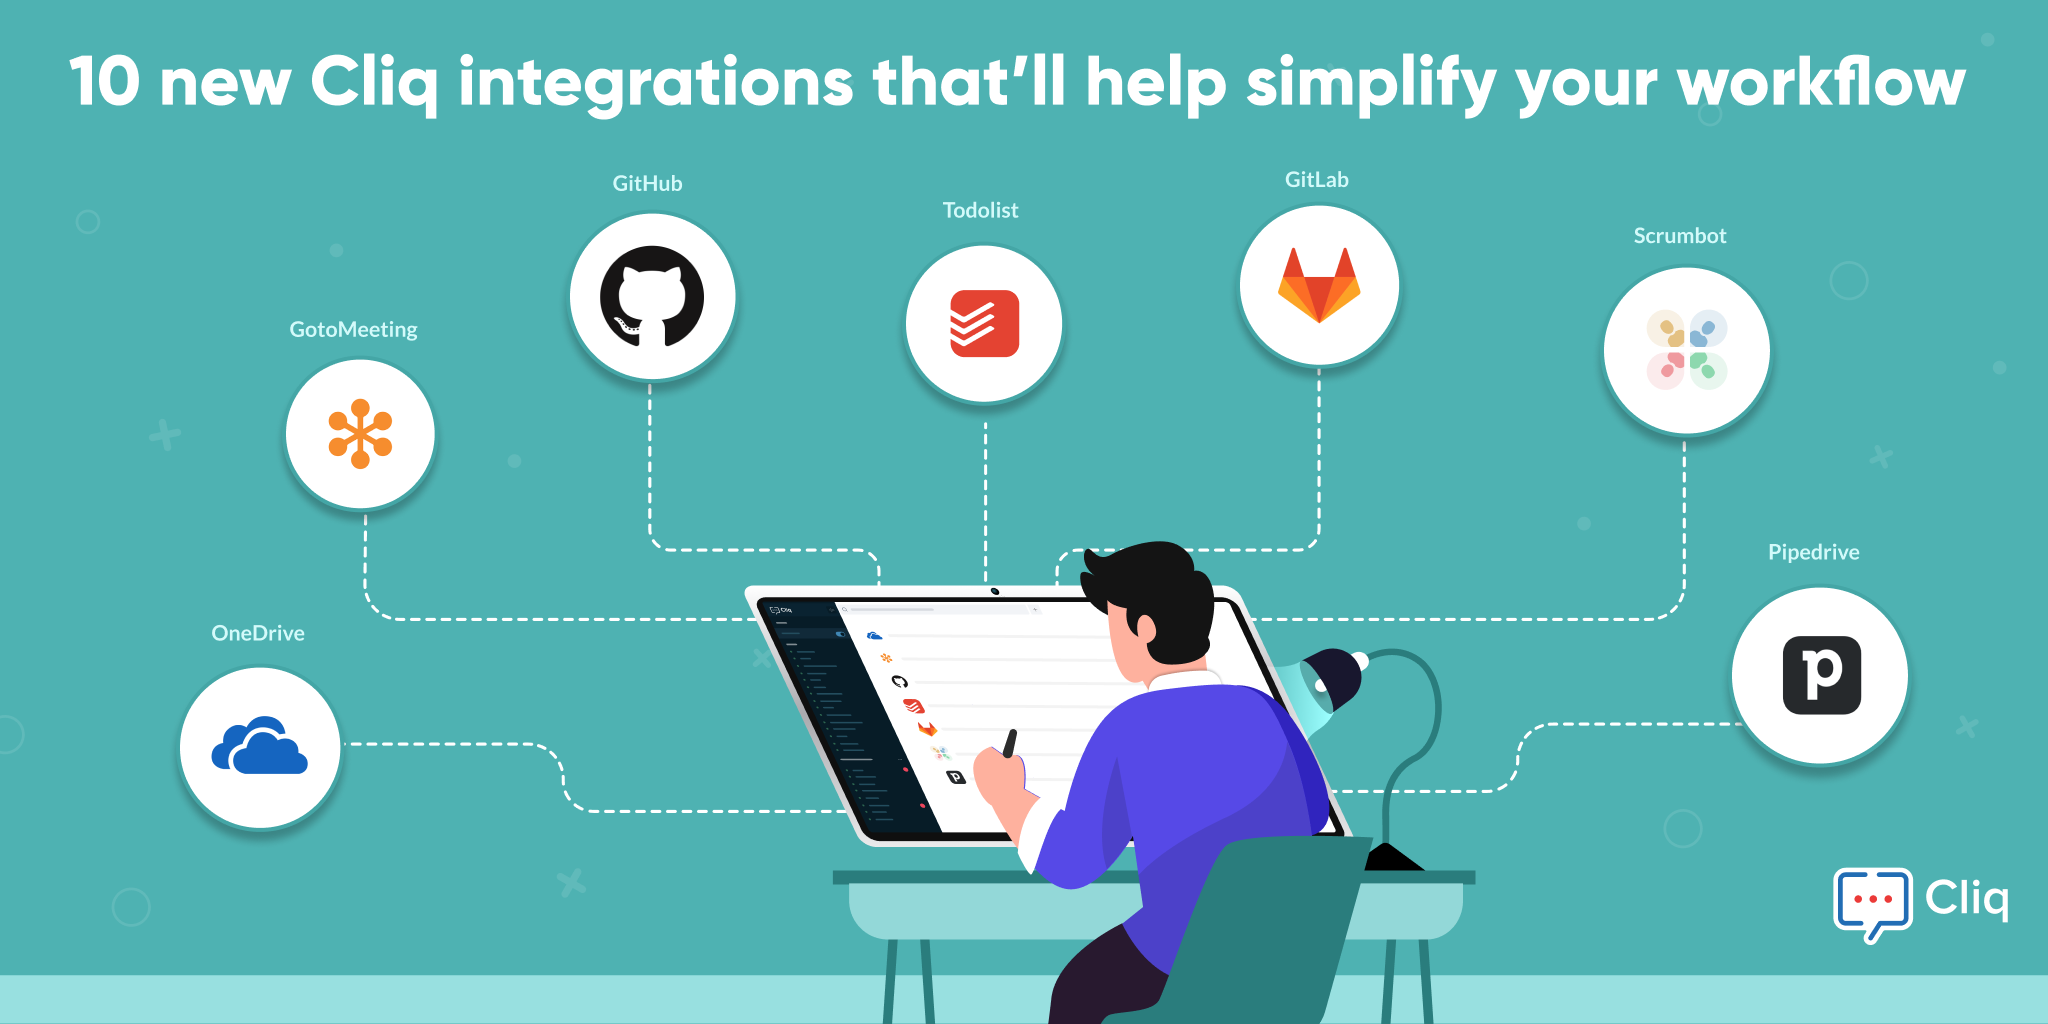 10 new Cliq integrations to simplify your workflow